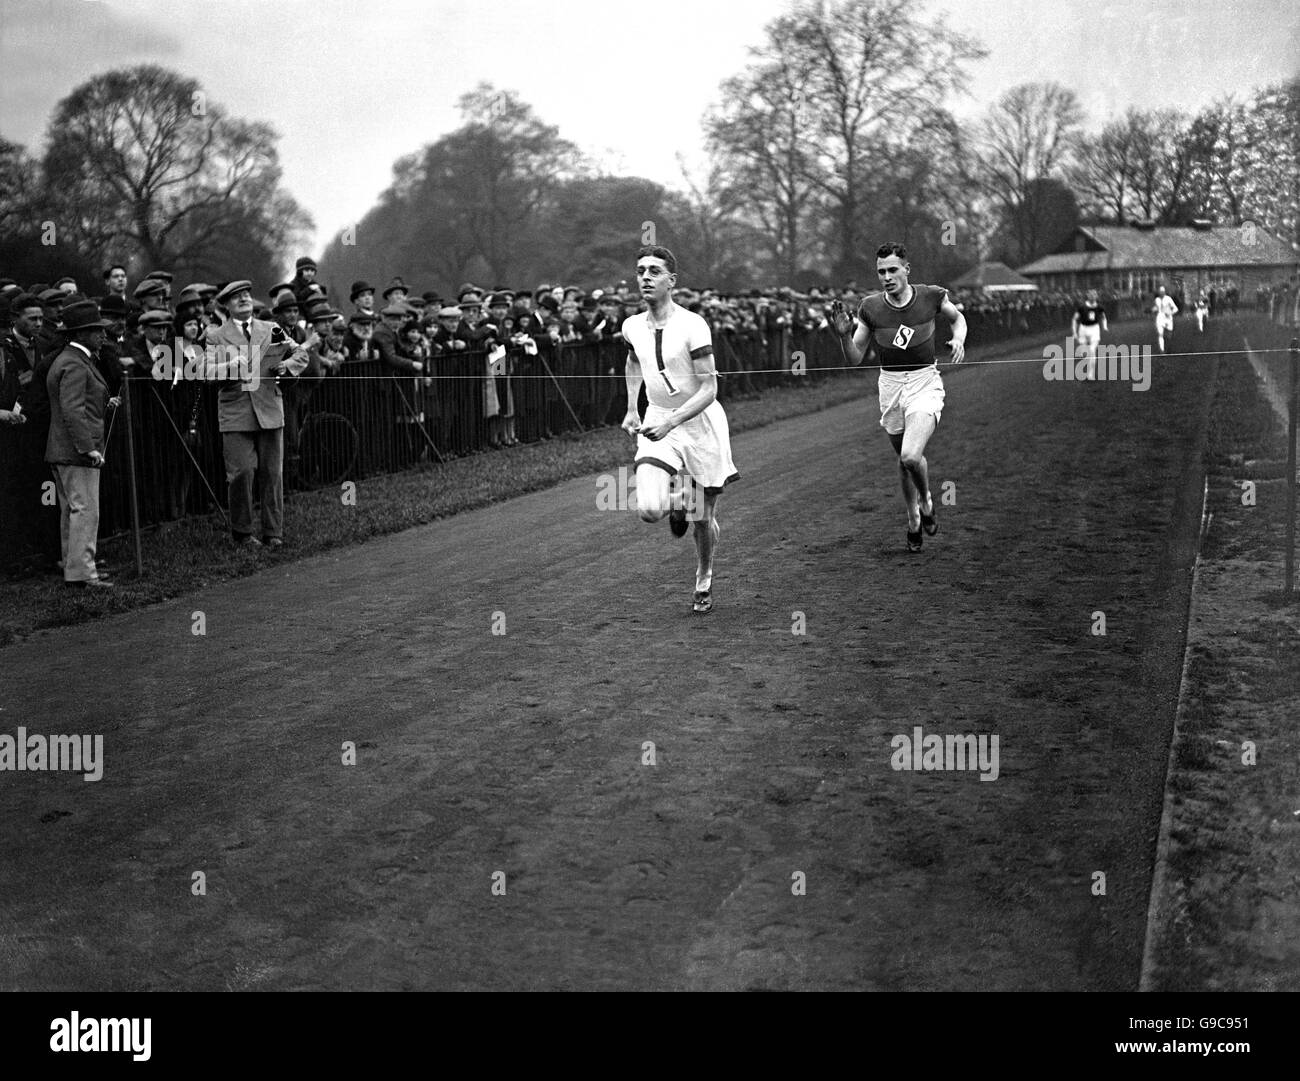 A close finish in the 880 yards match race between Belgrave Harriers and the London Athletic Club in Battersea Park, London, which was won by T Hampsen of London Athletic Club who finished just ahead of JE Tosh of Belgrave Harriers Stock Photo